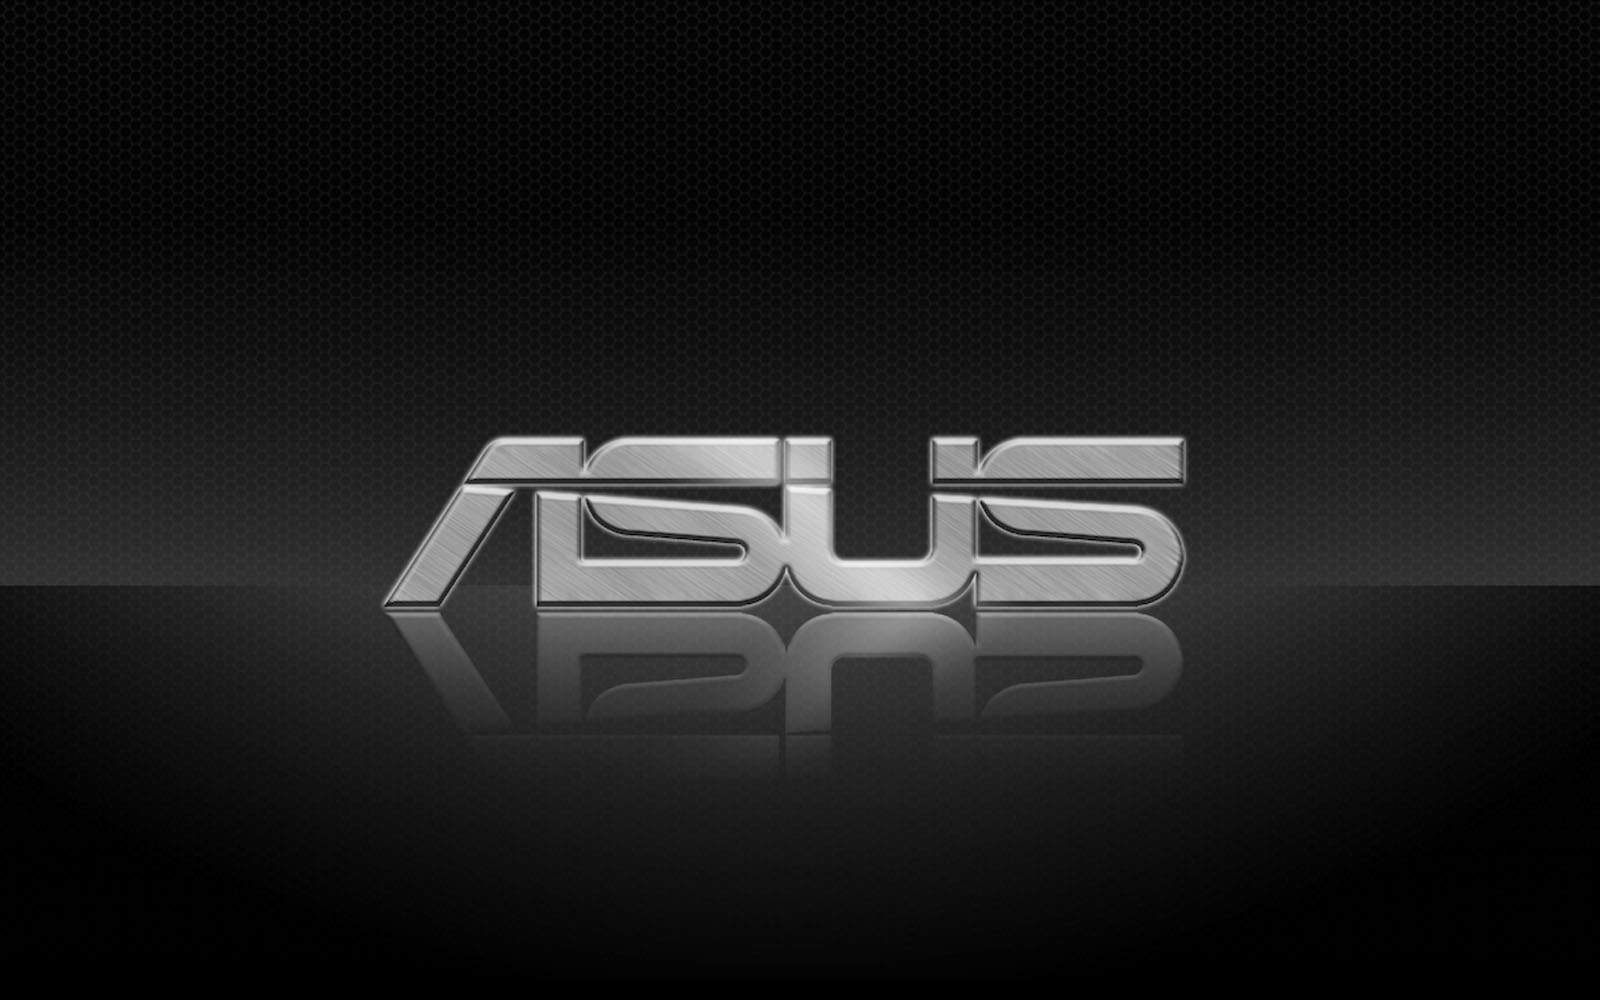 asus wallpapers asus desktop wallpapers asus desktop backgrounds asus 1600x1000